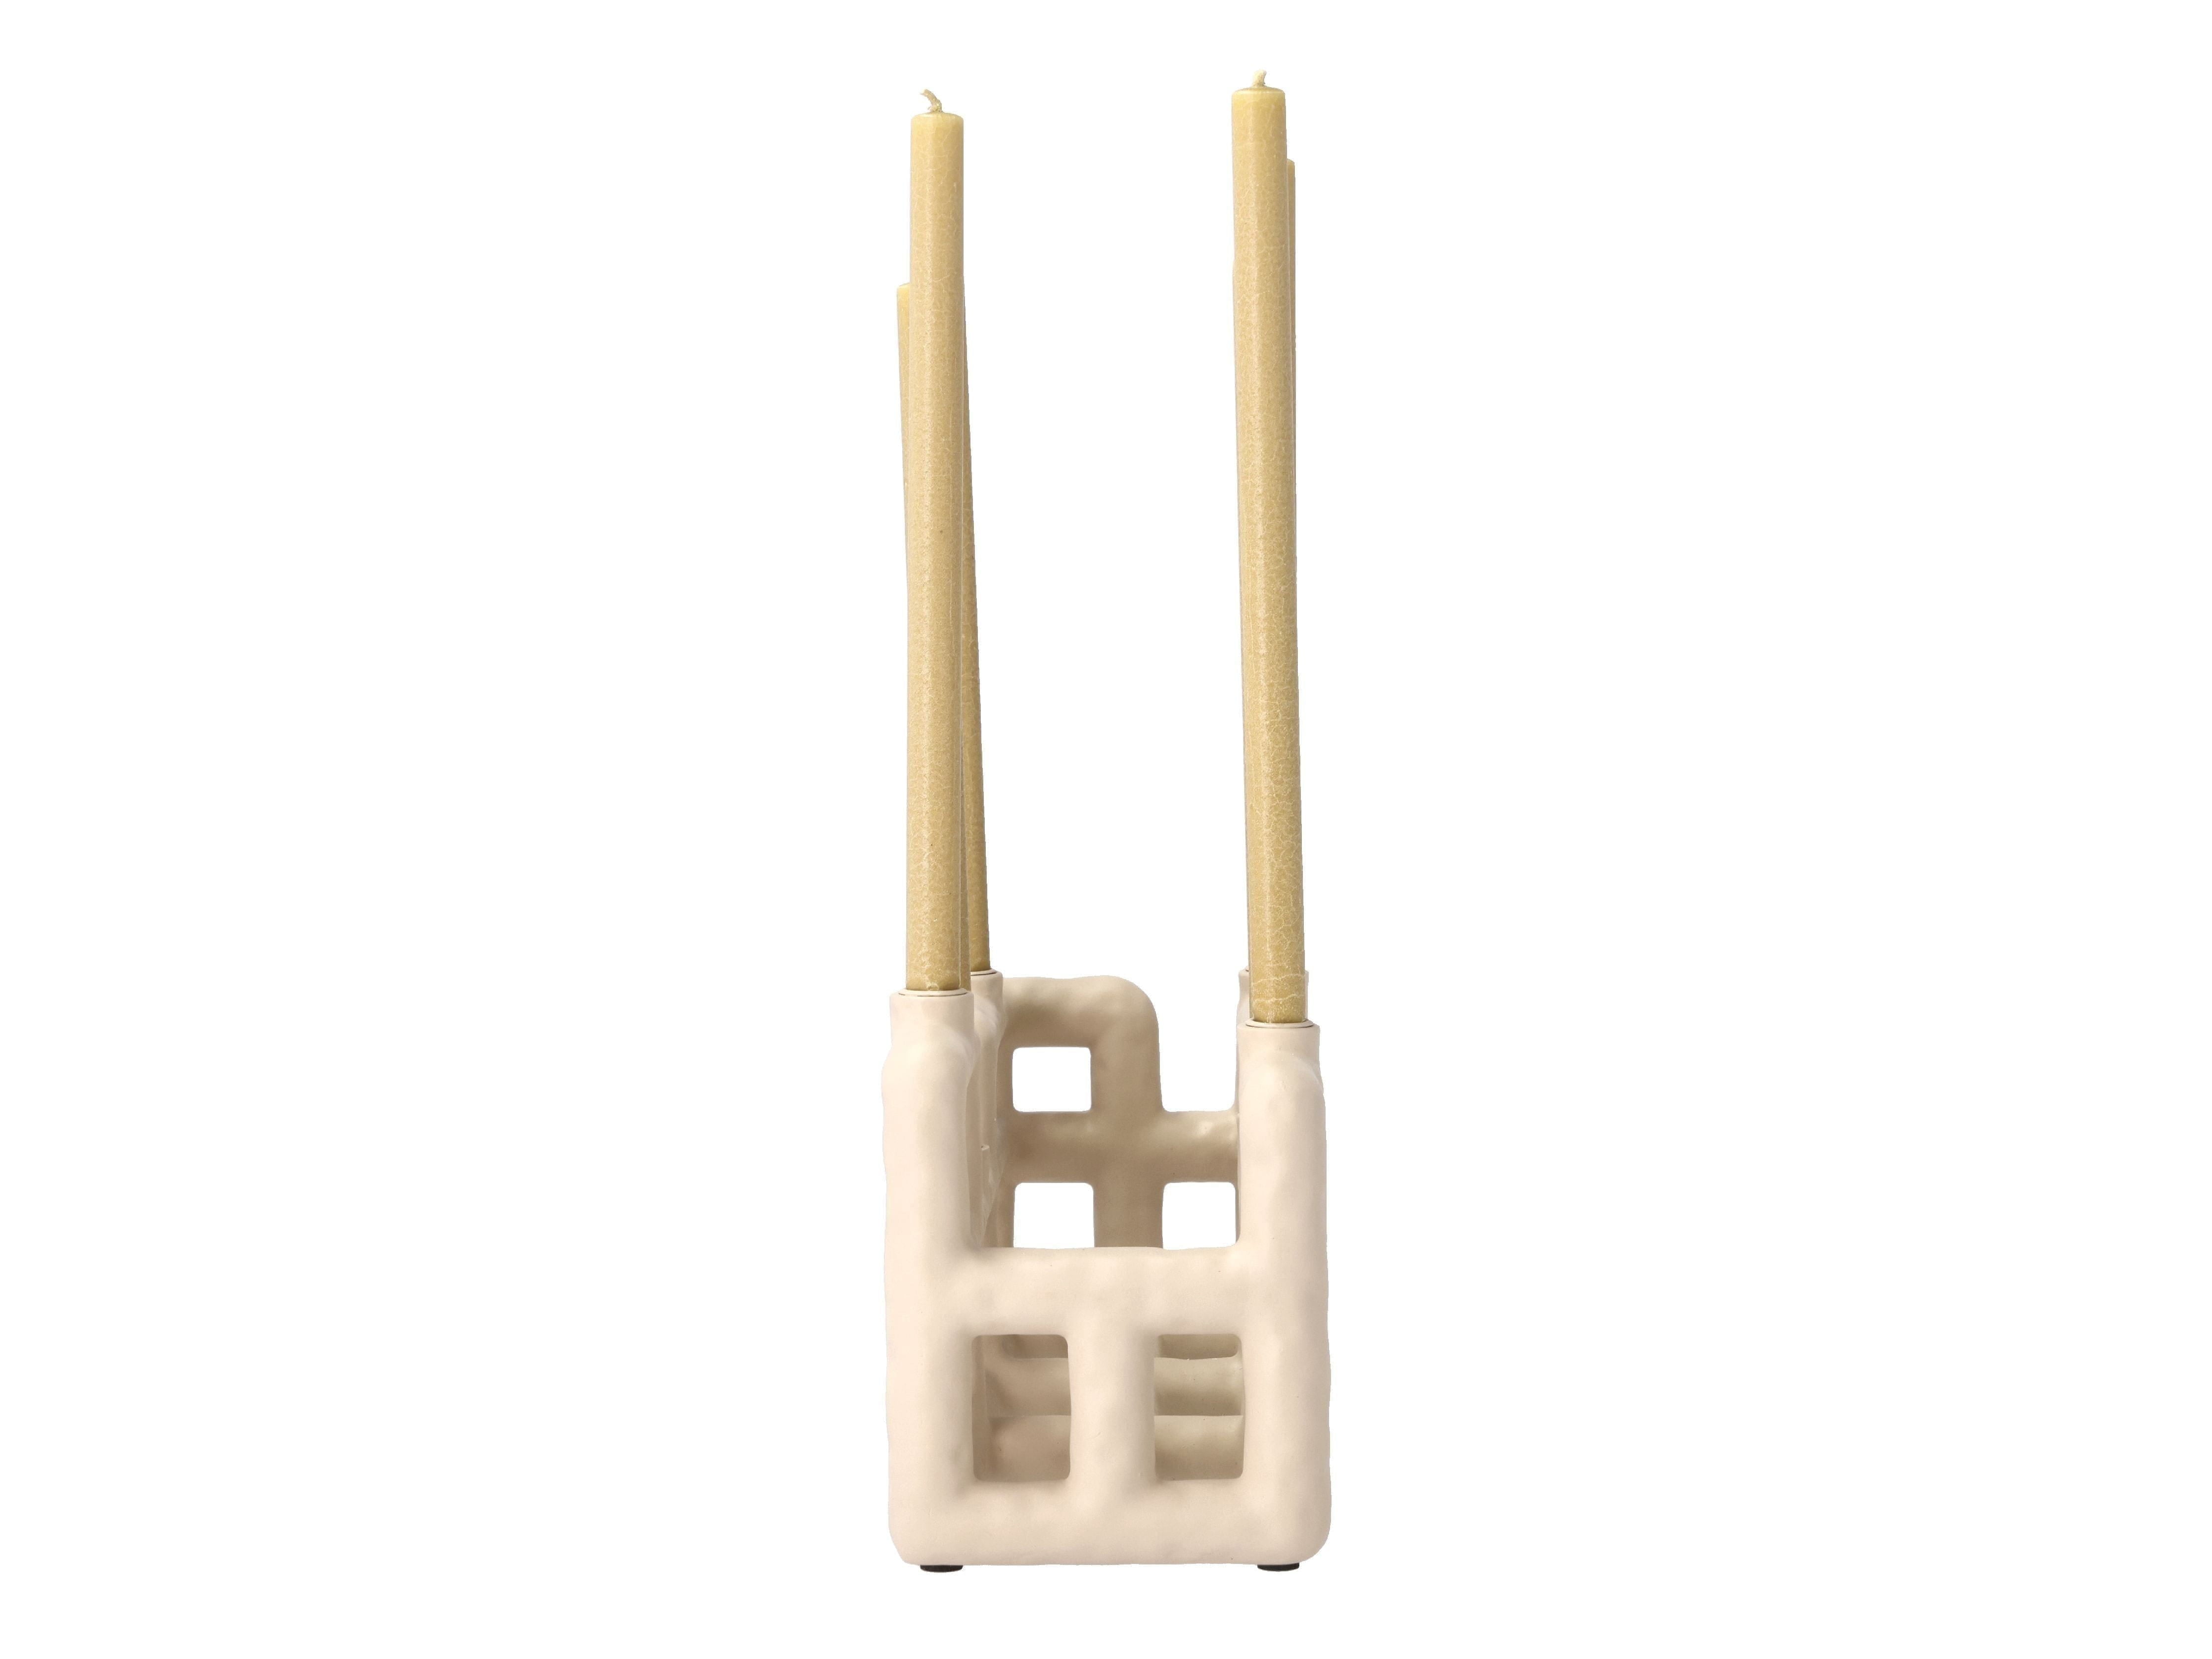 Villa Collection Lyng Candle Holder stor, sand